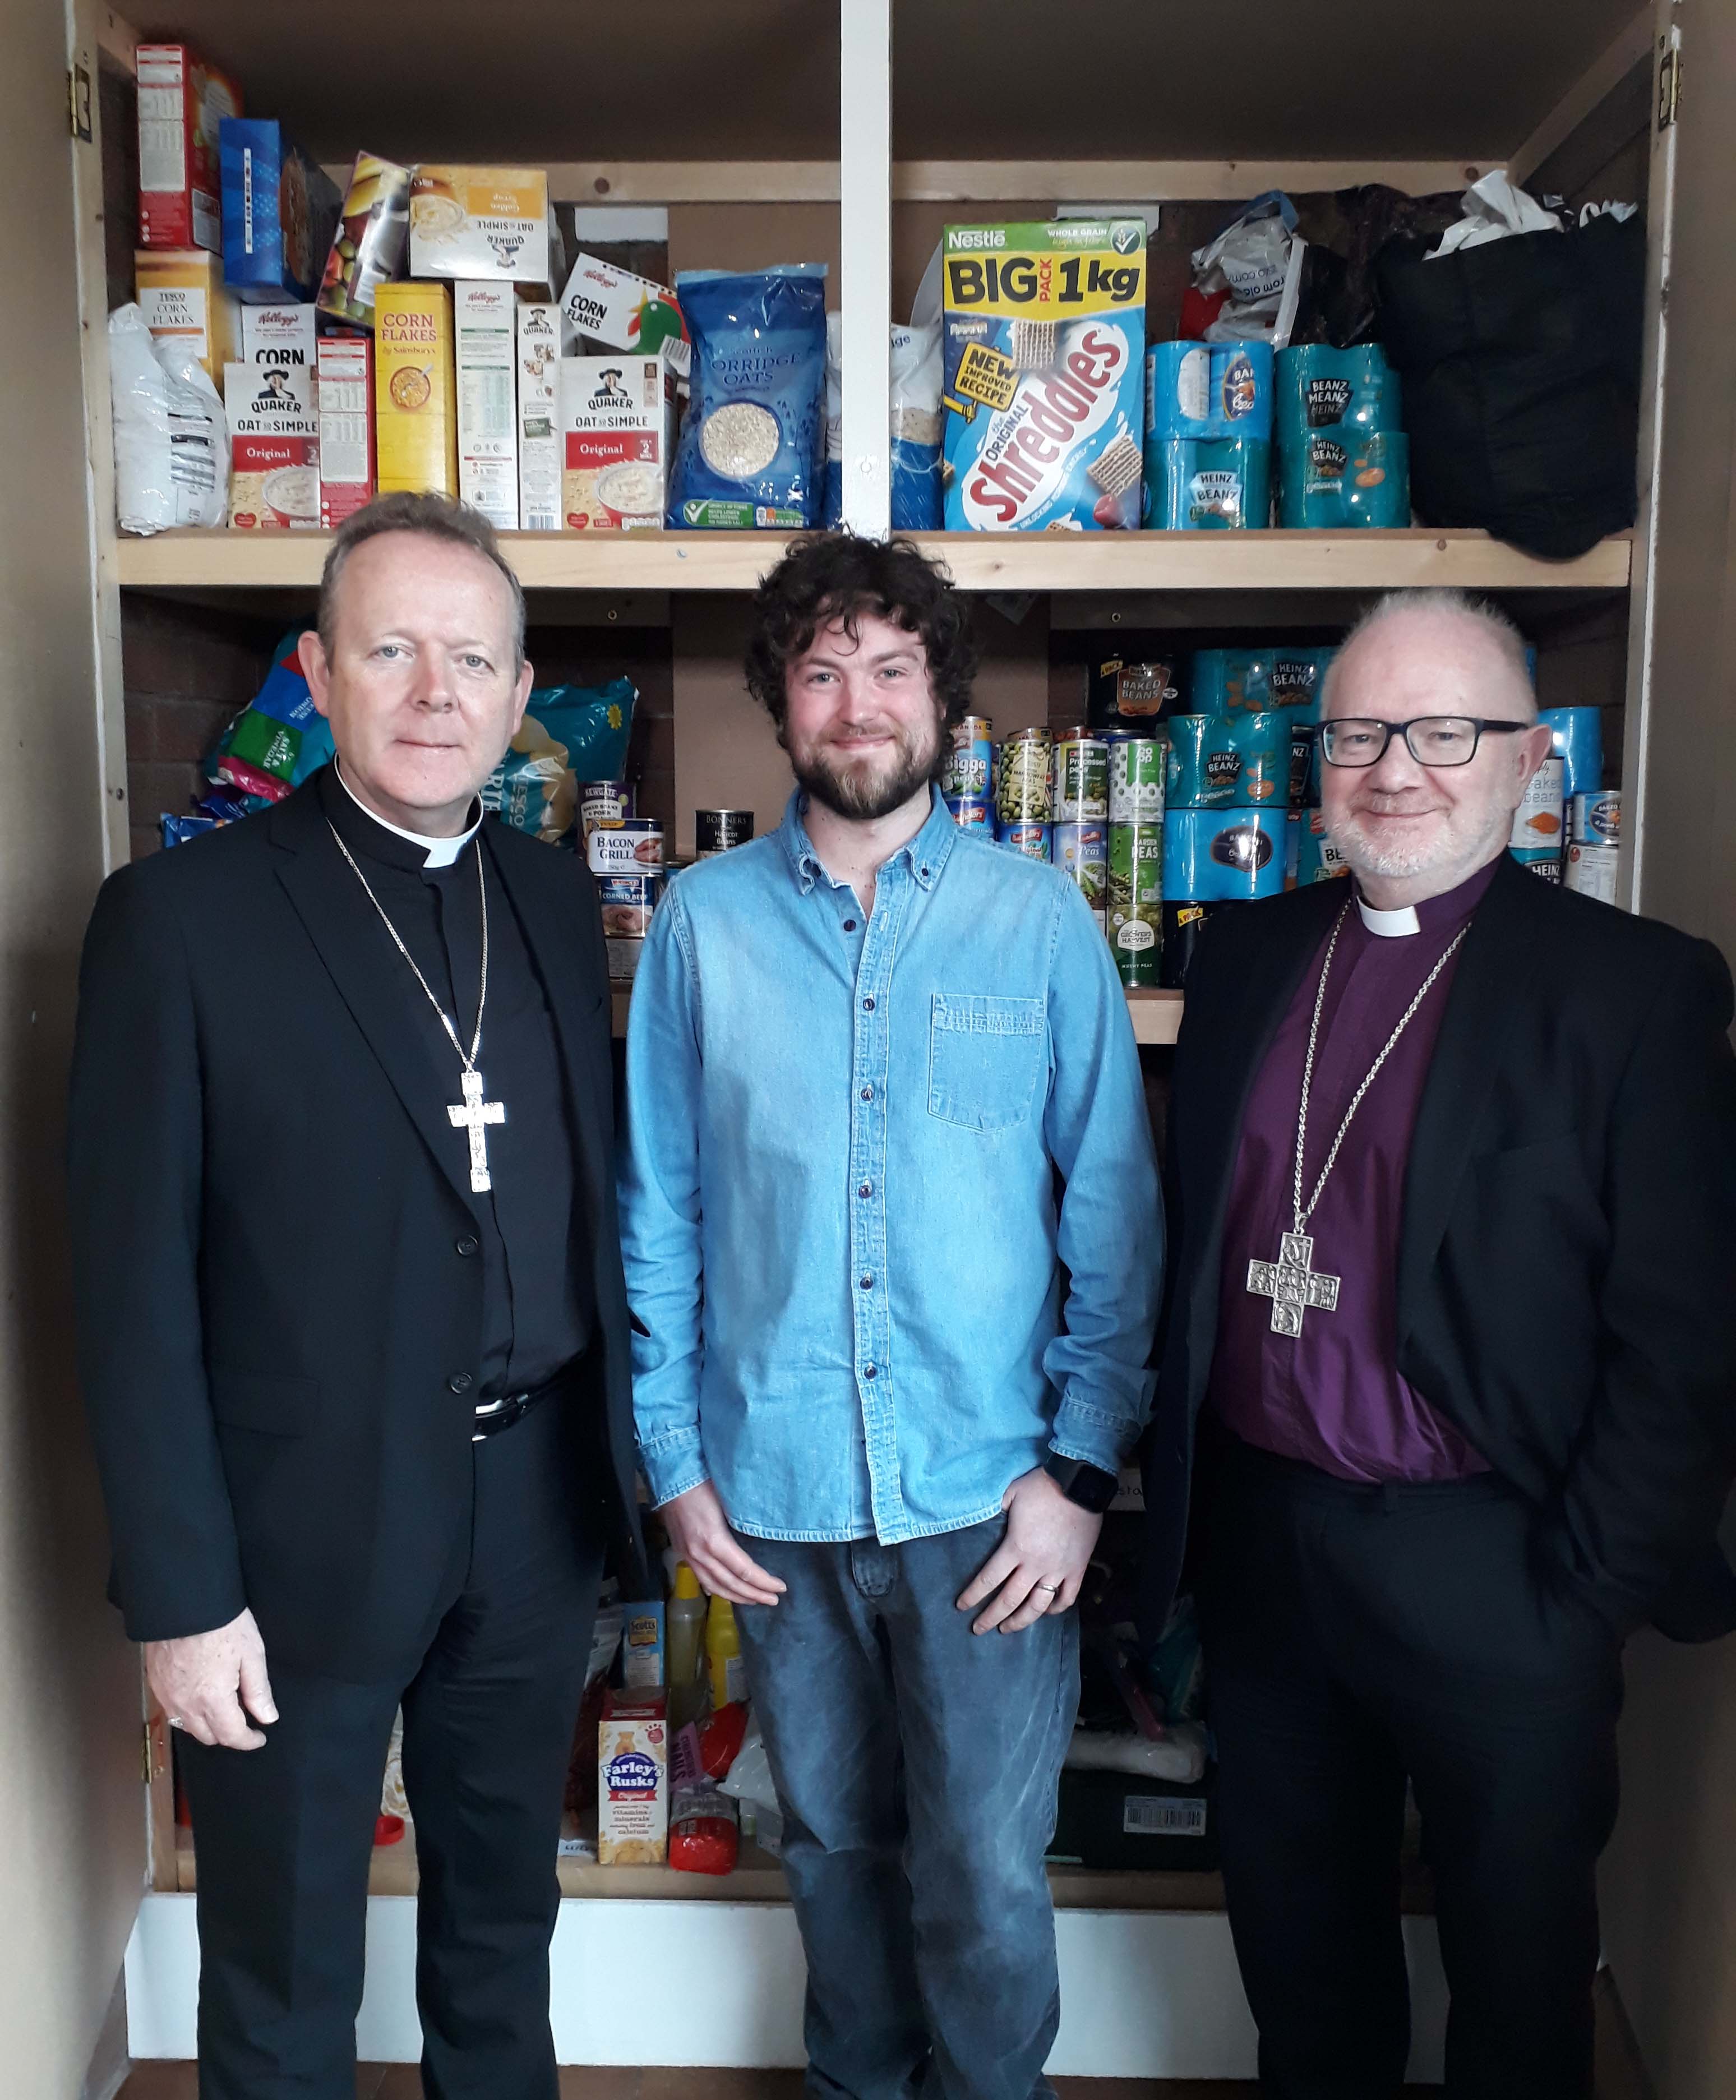 Archbishops Eamon Martin and Richard Clarke with David Nesbitt from the BCM food bank.